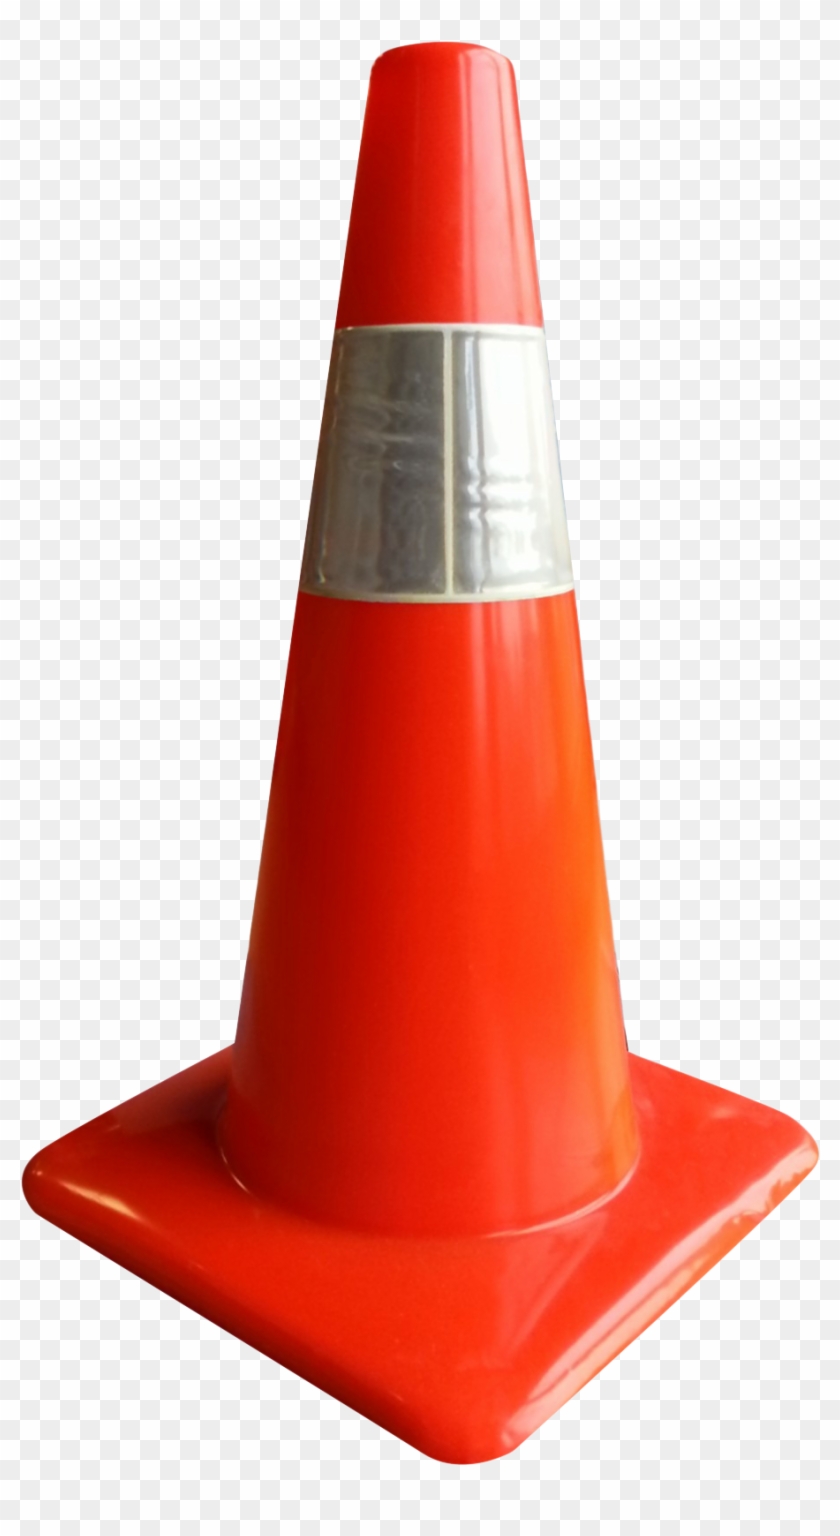 Related Wallpapers - Warning Cone #1374184